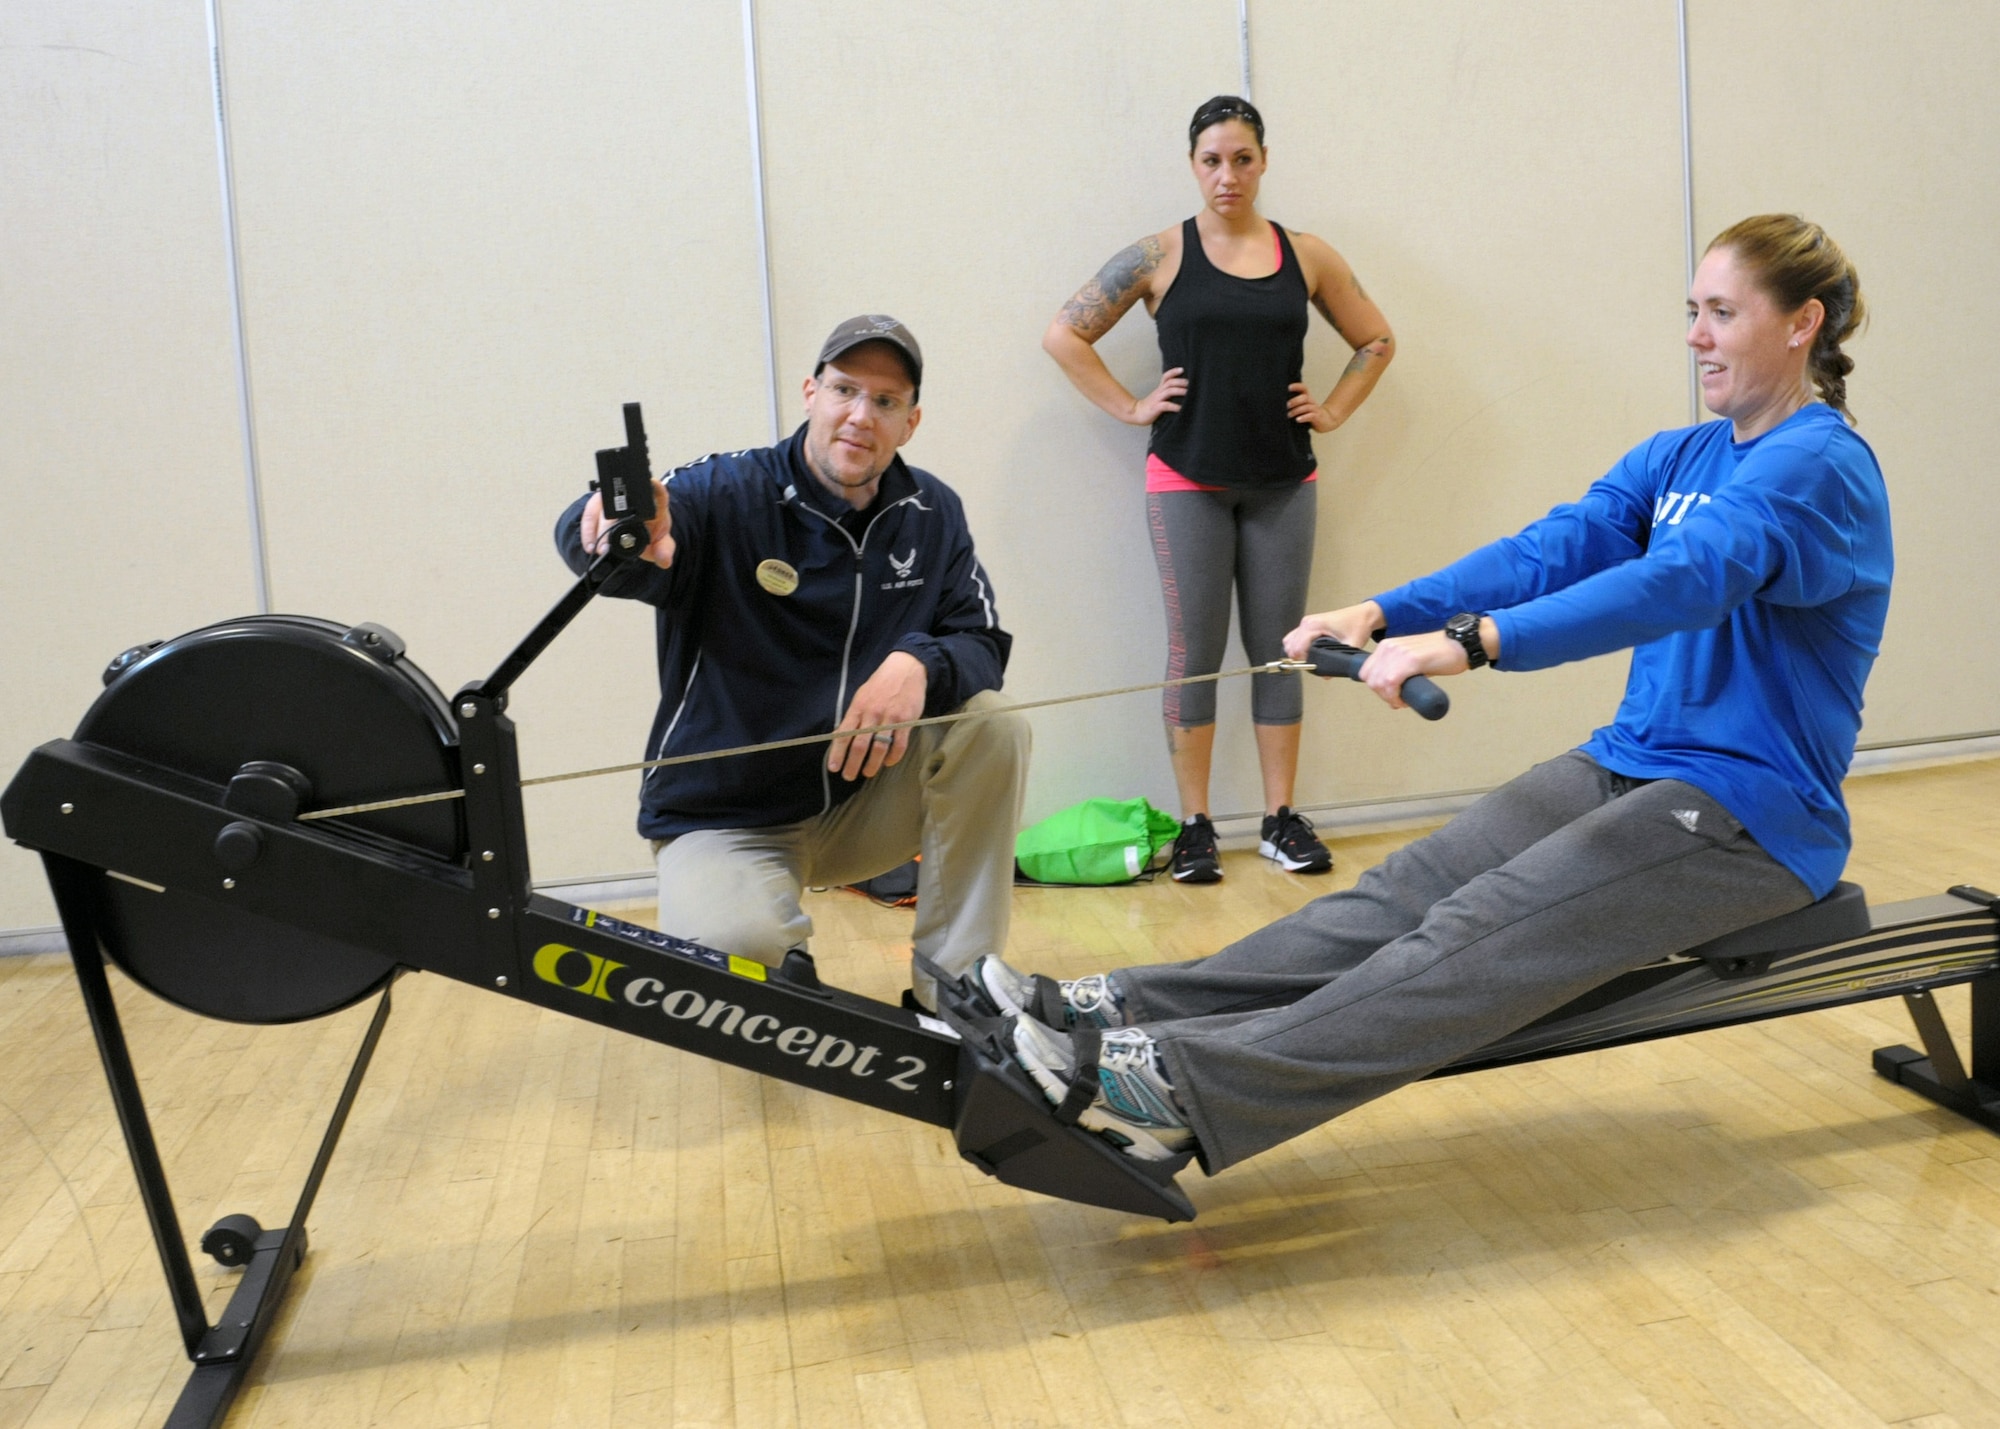 Christian Wasylchak, fitness program manager, assists 2nd Lt. Rebecca, 558 Flying Training Squadron remote piloted aircraft student, on the rowing machine at the Rambler Fitness Center at Joint Base San Antonio-Randolph, Dec. 6, 2016. There are 11 fitness centers throughout JBSA providing strength and conditioning equipment from weights to cardio and classes from aerobics to Taekwondo. The fitness centers are free to Department of Defense cardholders, including active-duty, Reserve and National Guard members, military family members, military retirees and government civilians.